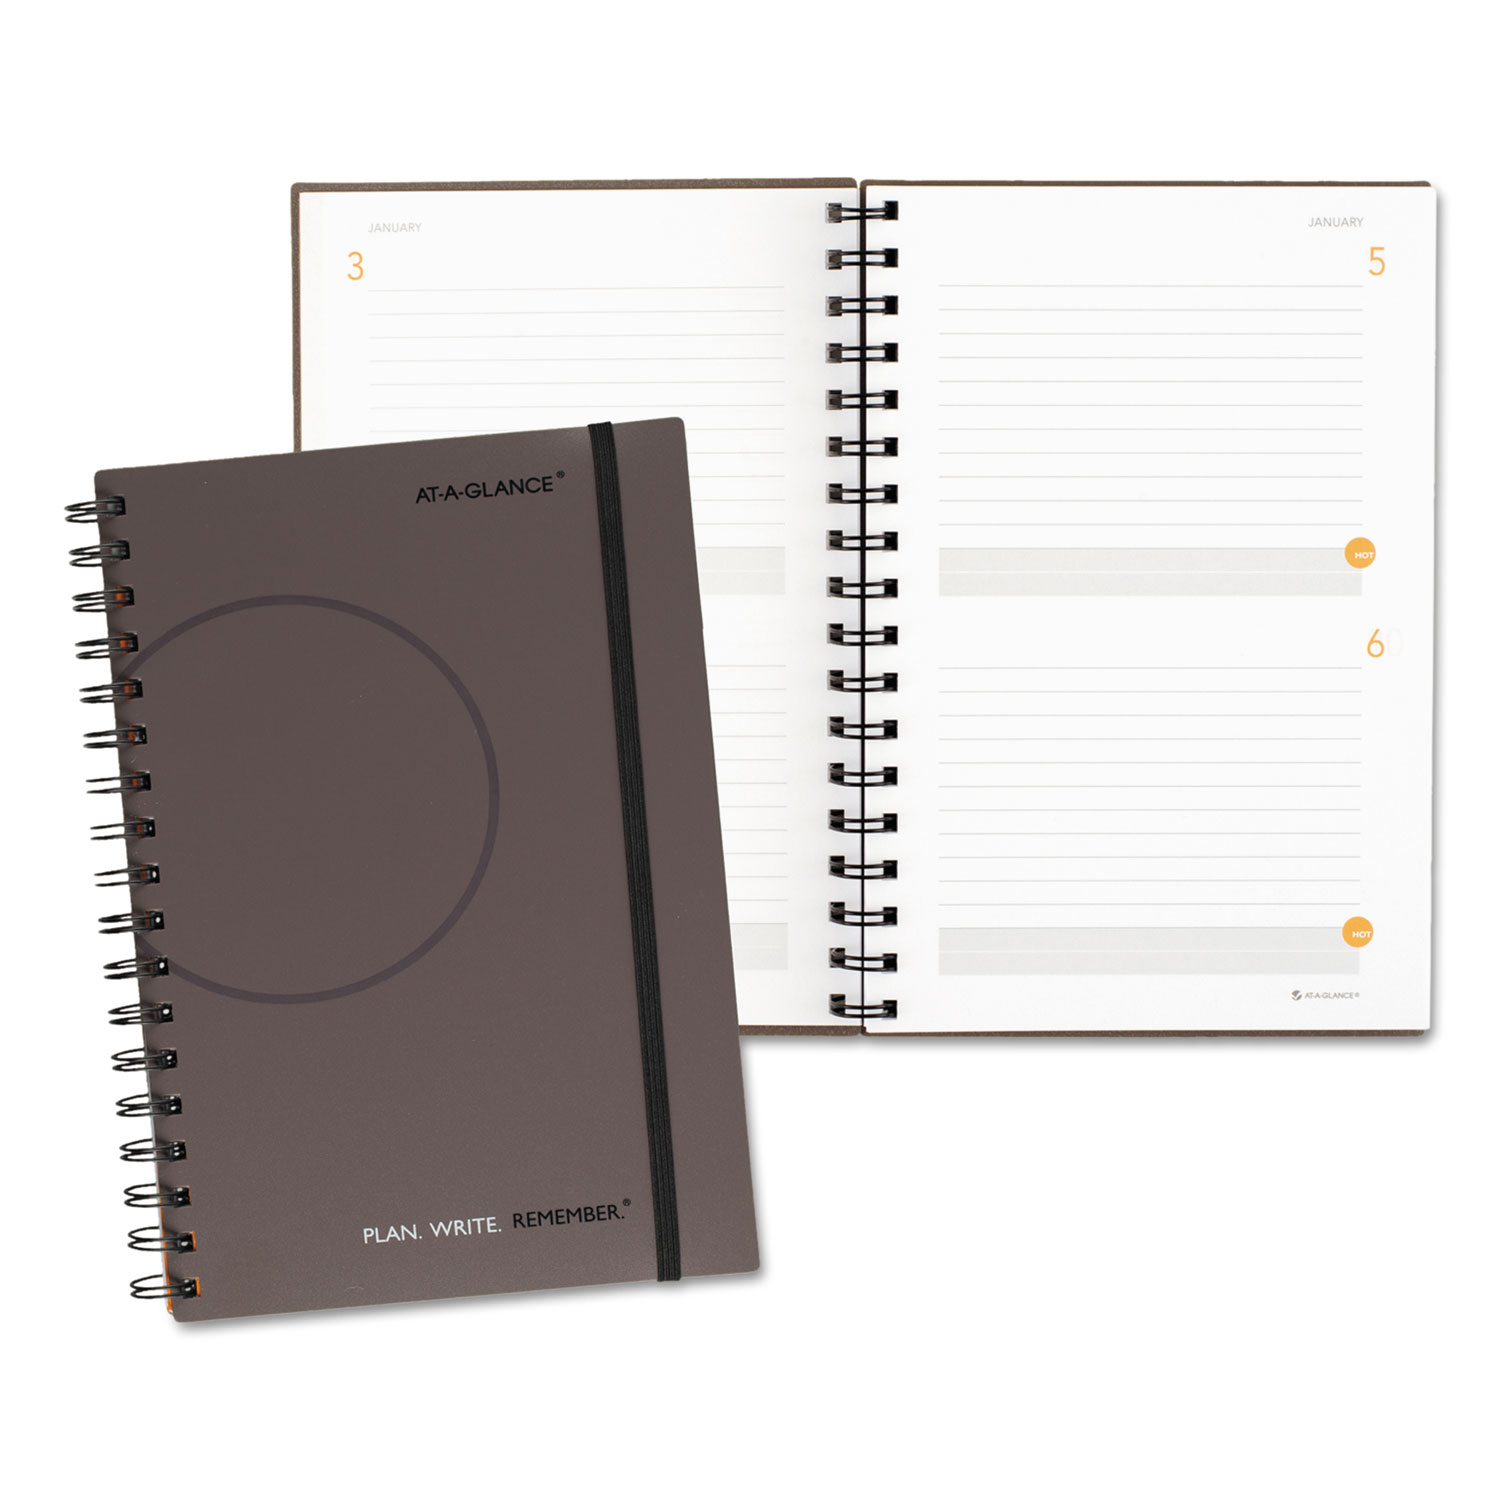  AT-A-GLANCE 80620330 Plan. Write. Remember. Planning Notebook Two Days Per Page, 9 x 6, Gray (AAG80620330) 